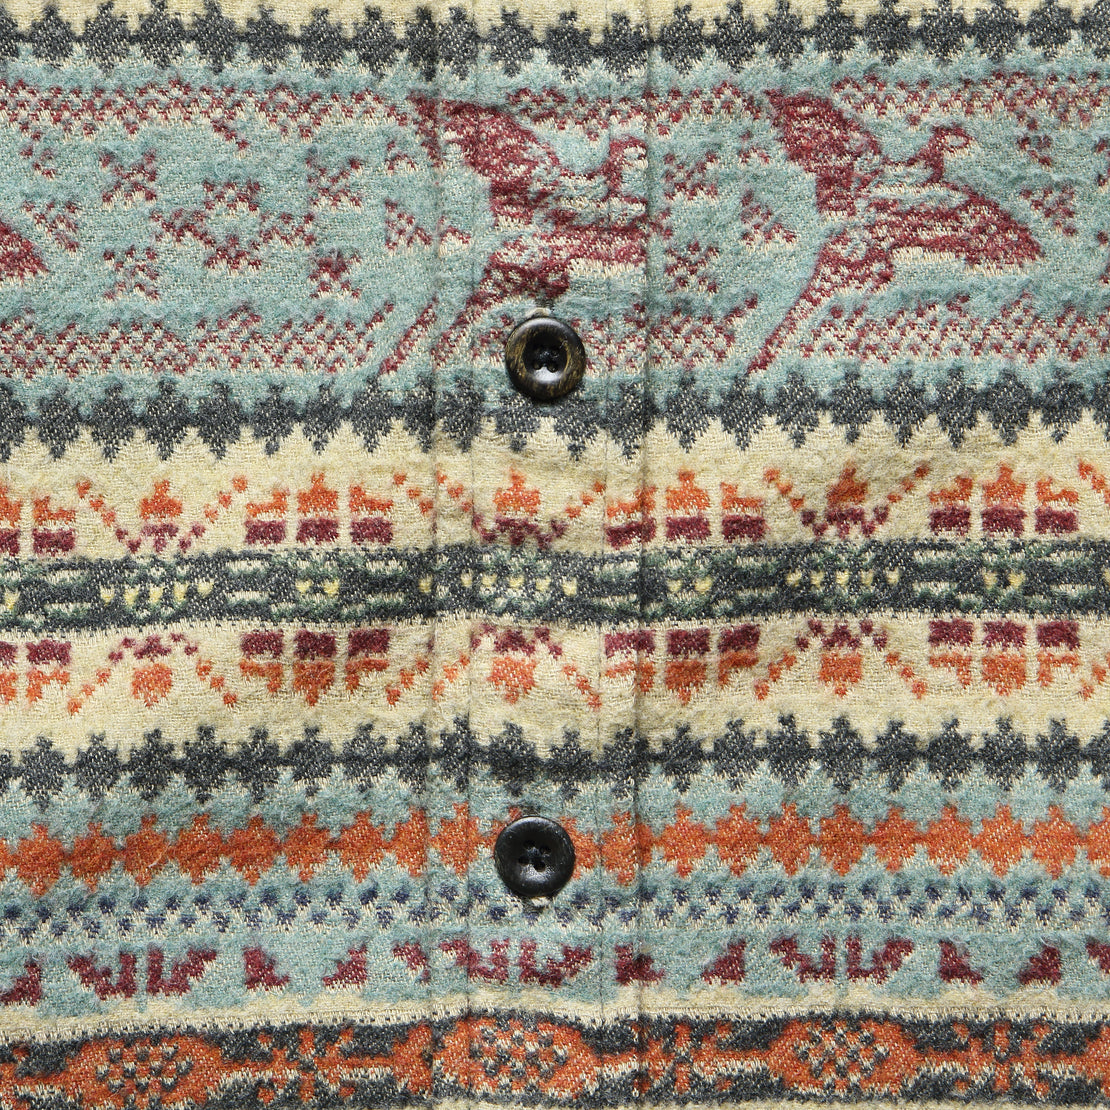 Fair Isle Jacquard Workshirt - Blue - RRL - STAG Provisions - Tops - L/S Woven - Other Pattern